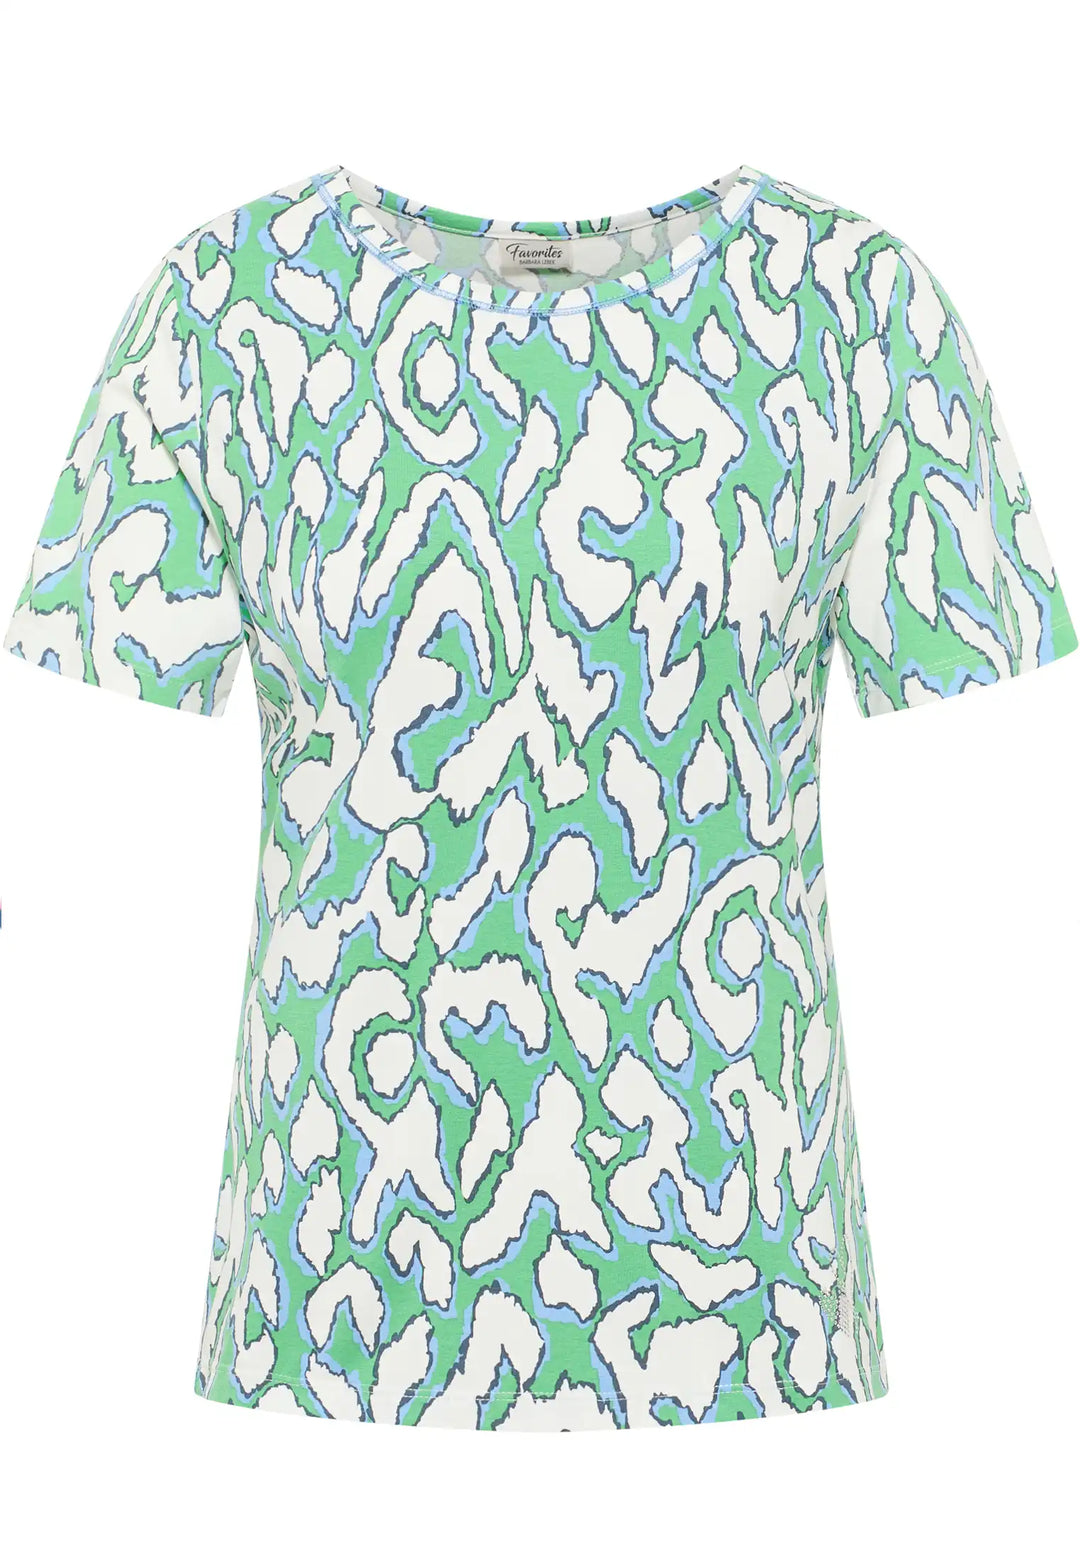 Vibrant green and blue abstract coral reef print on a short-sleeved top with a round neckline, embodying a lively and comfortable style, style 57610042-650